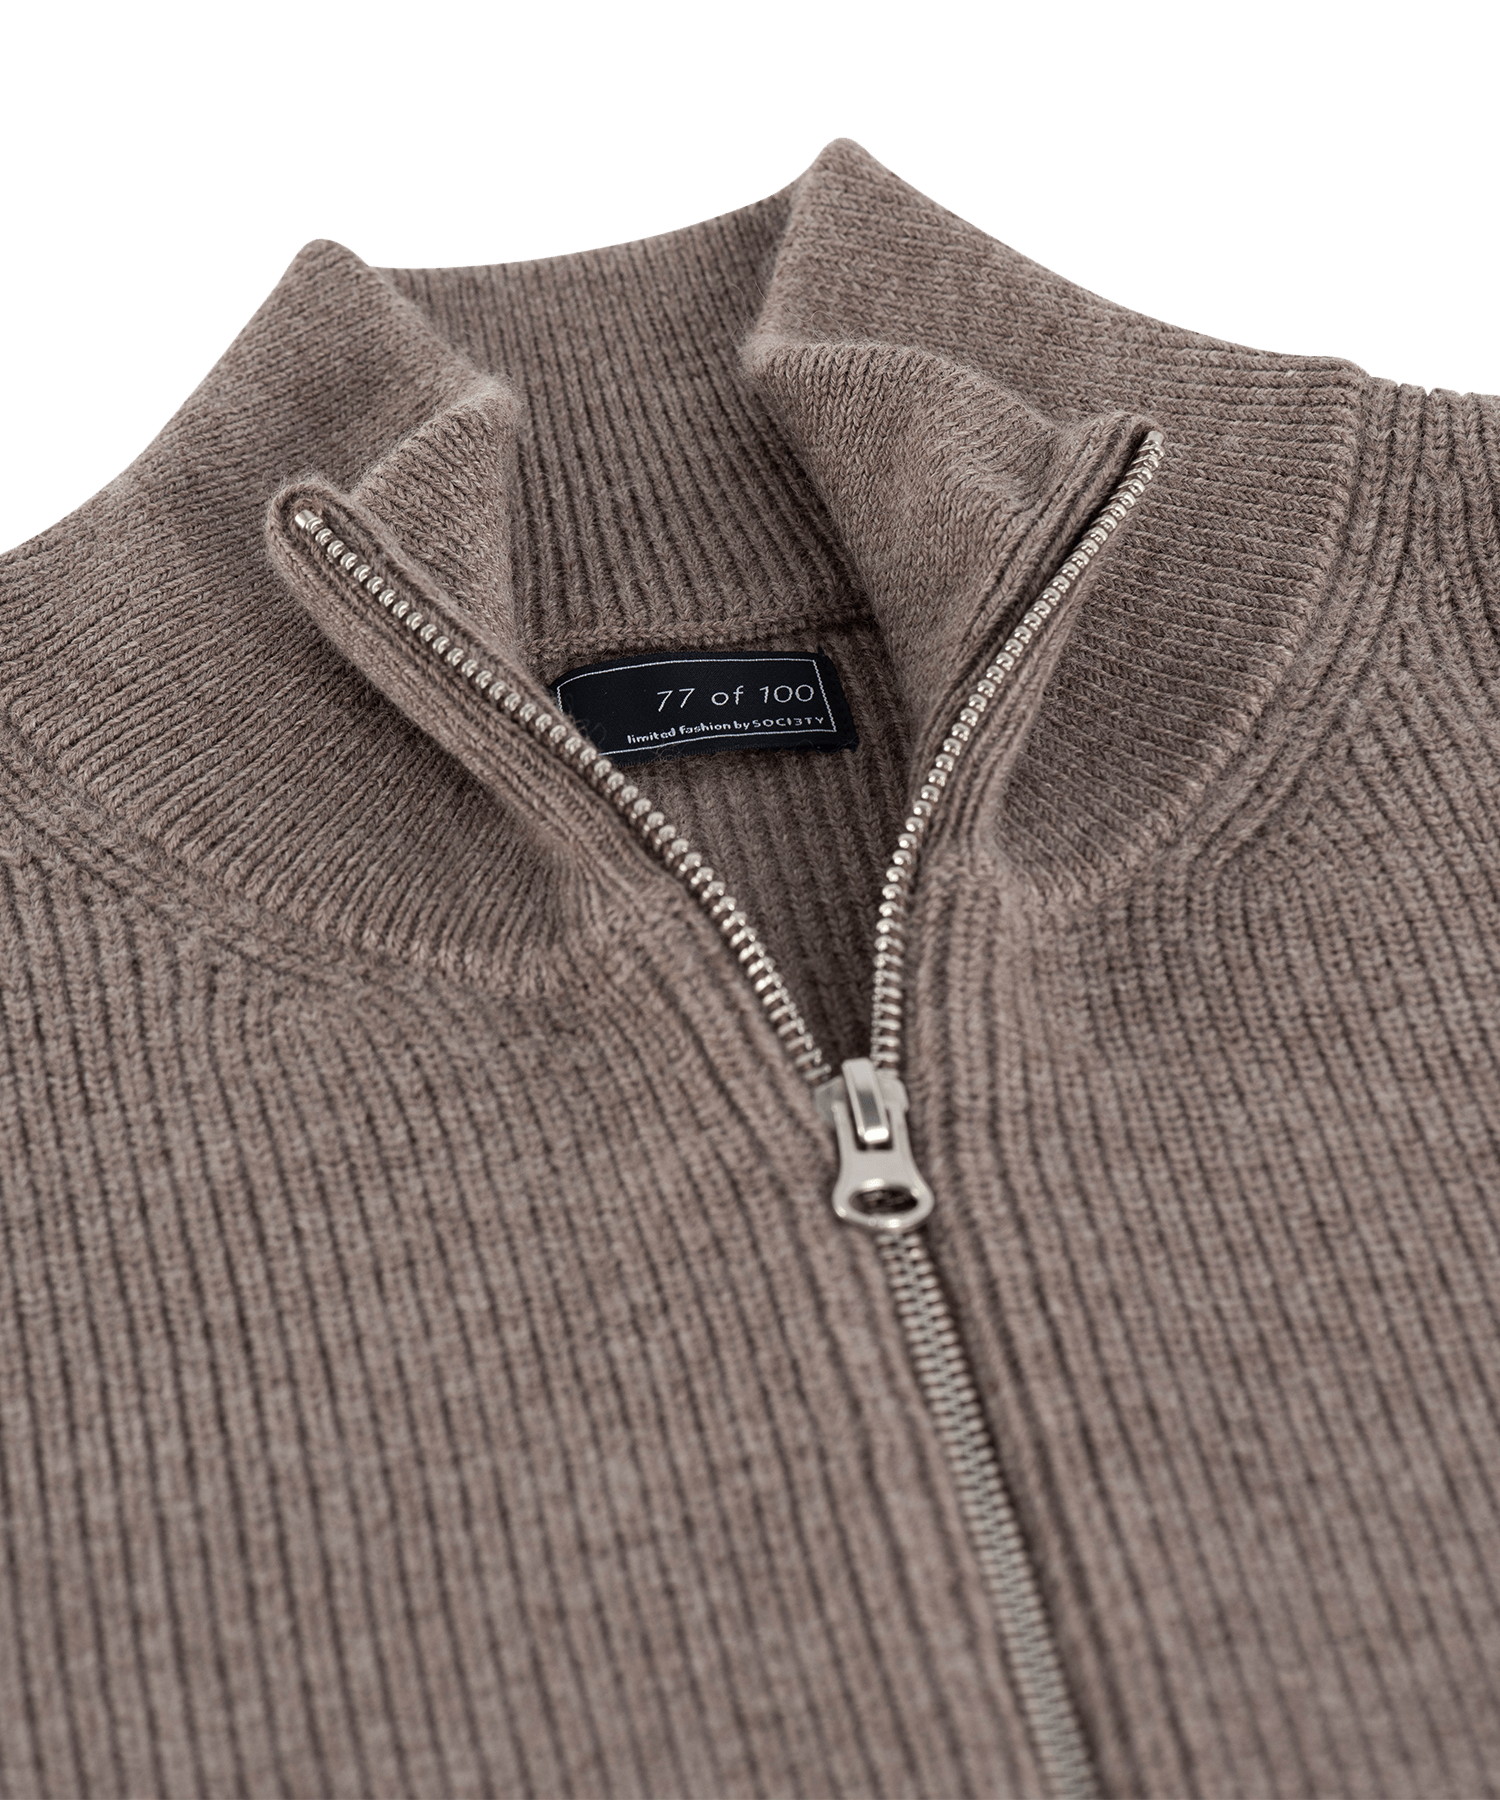 VEST EXTRAFINE WO L / Beige / taupe